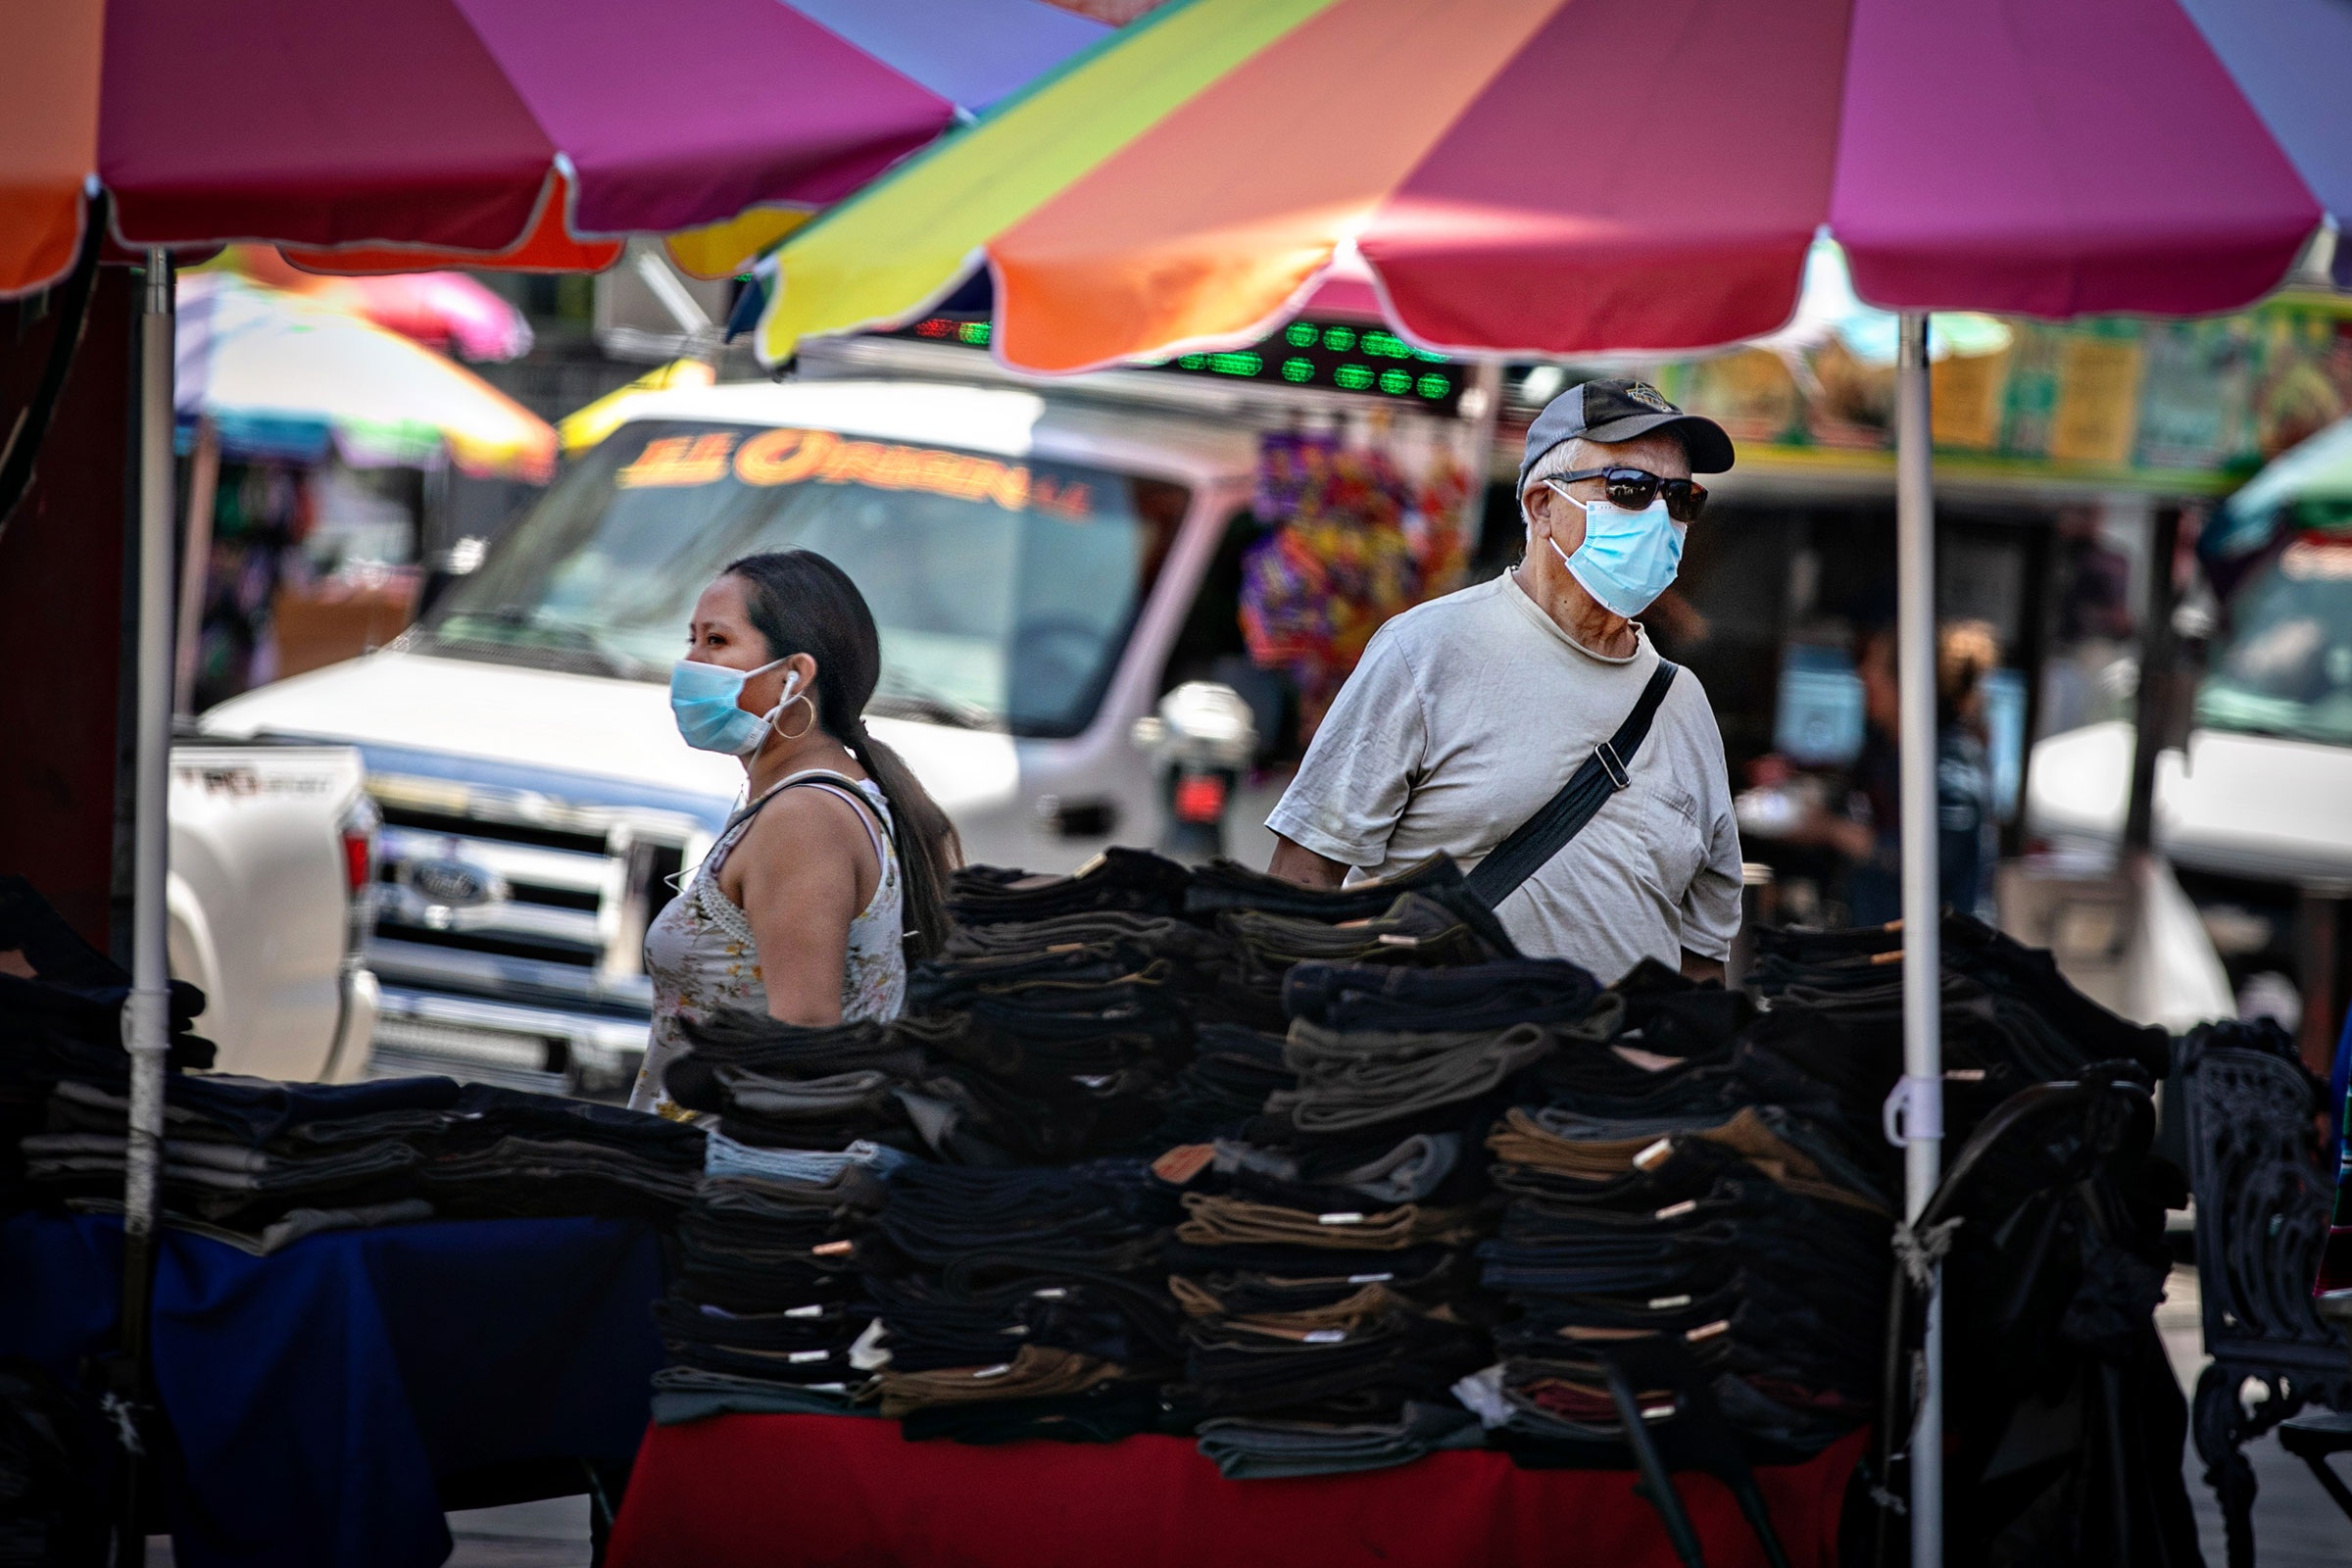 People wearing masks shop and work in Santee Ally in Loa Angeles on July 11, 2022.